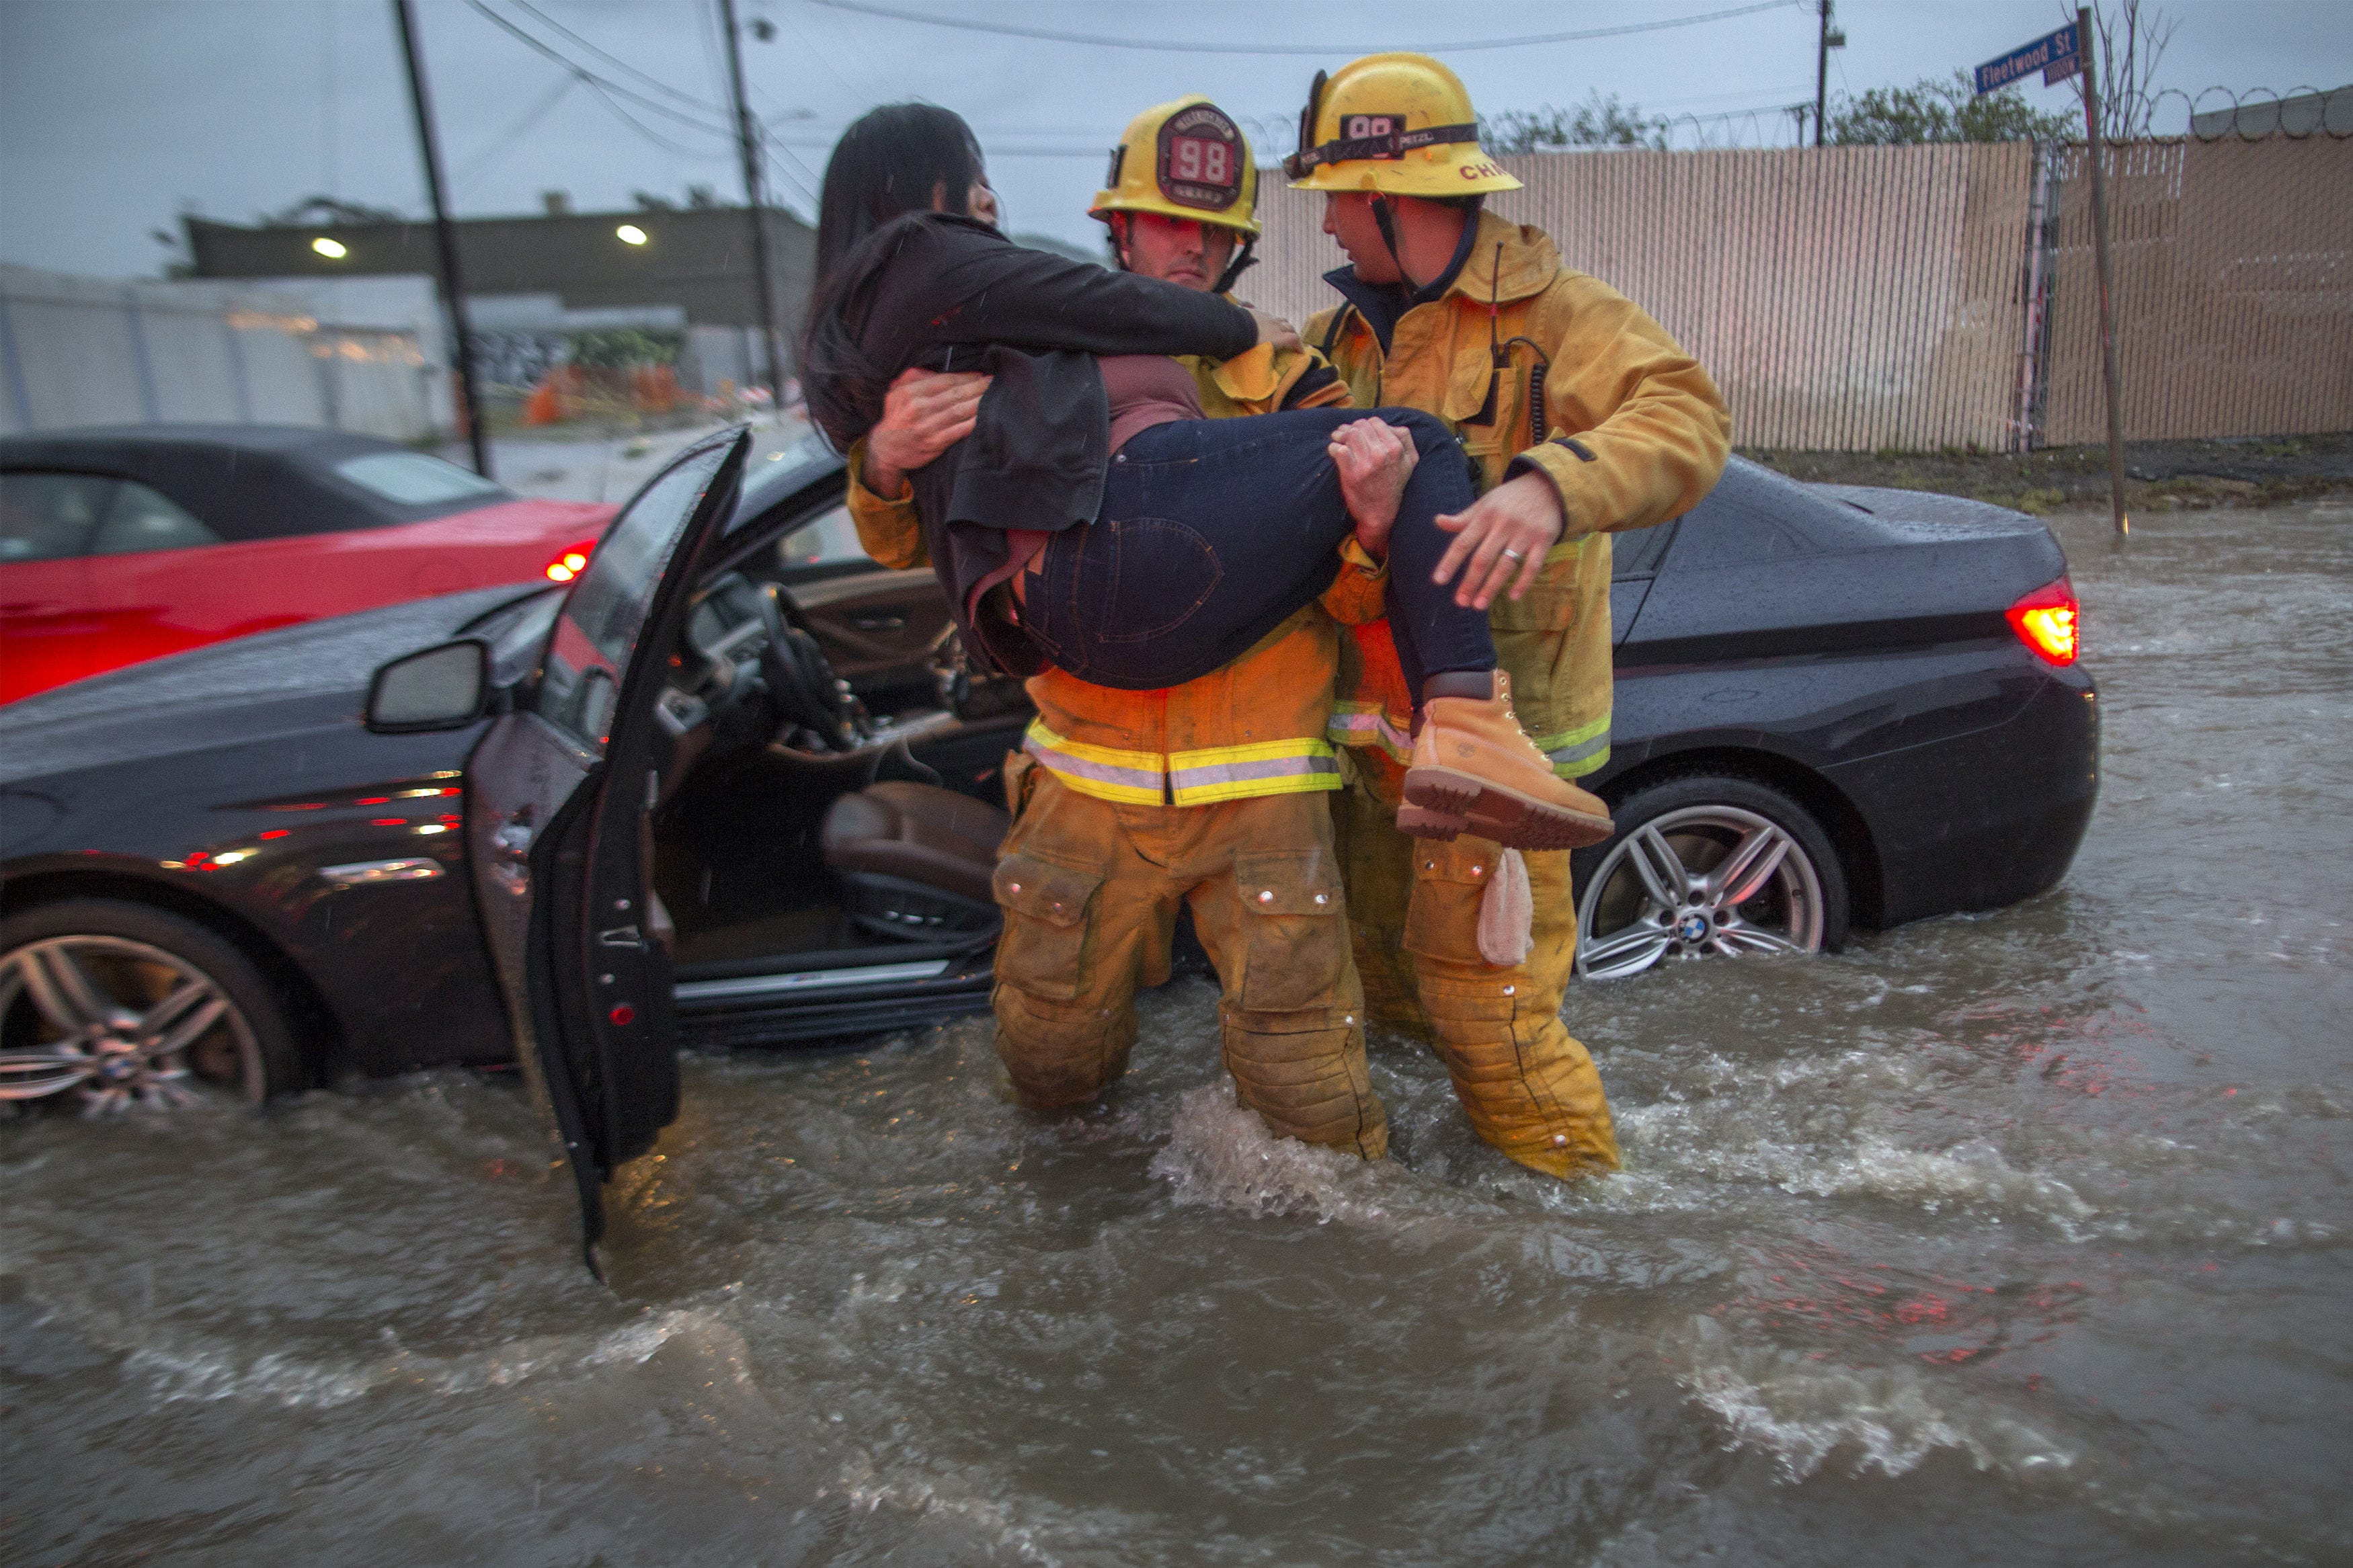 Strongest storm in years lashing California